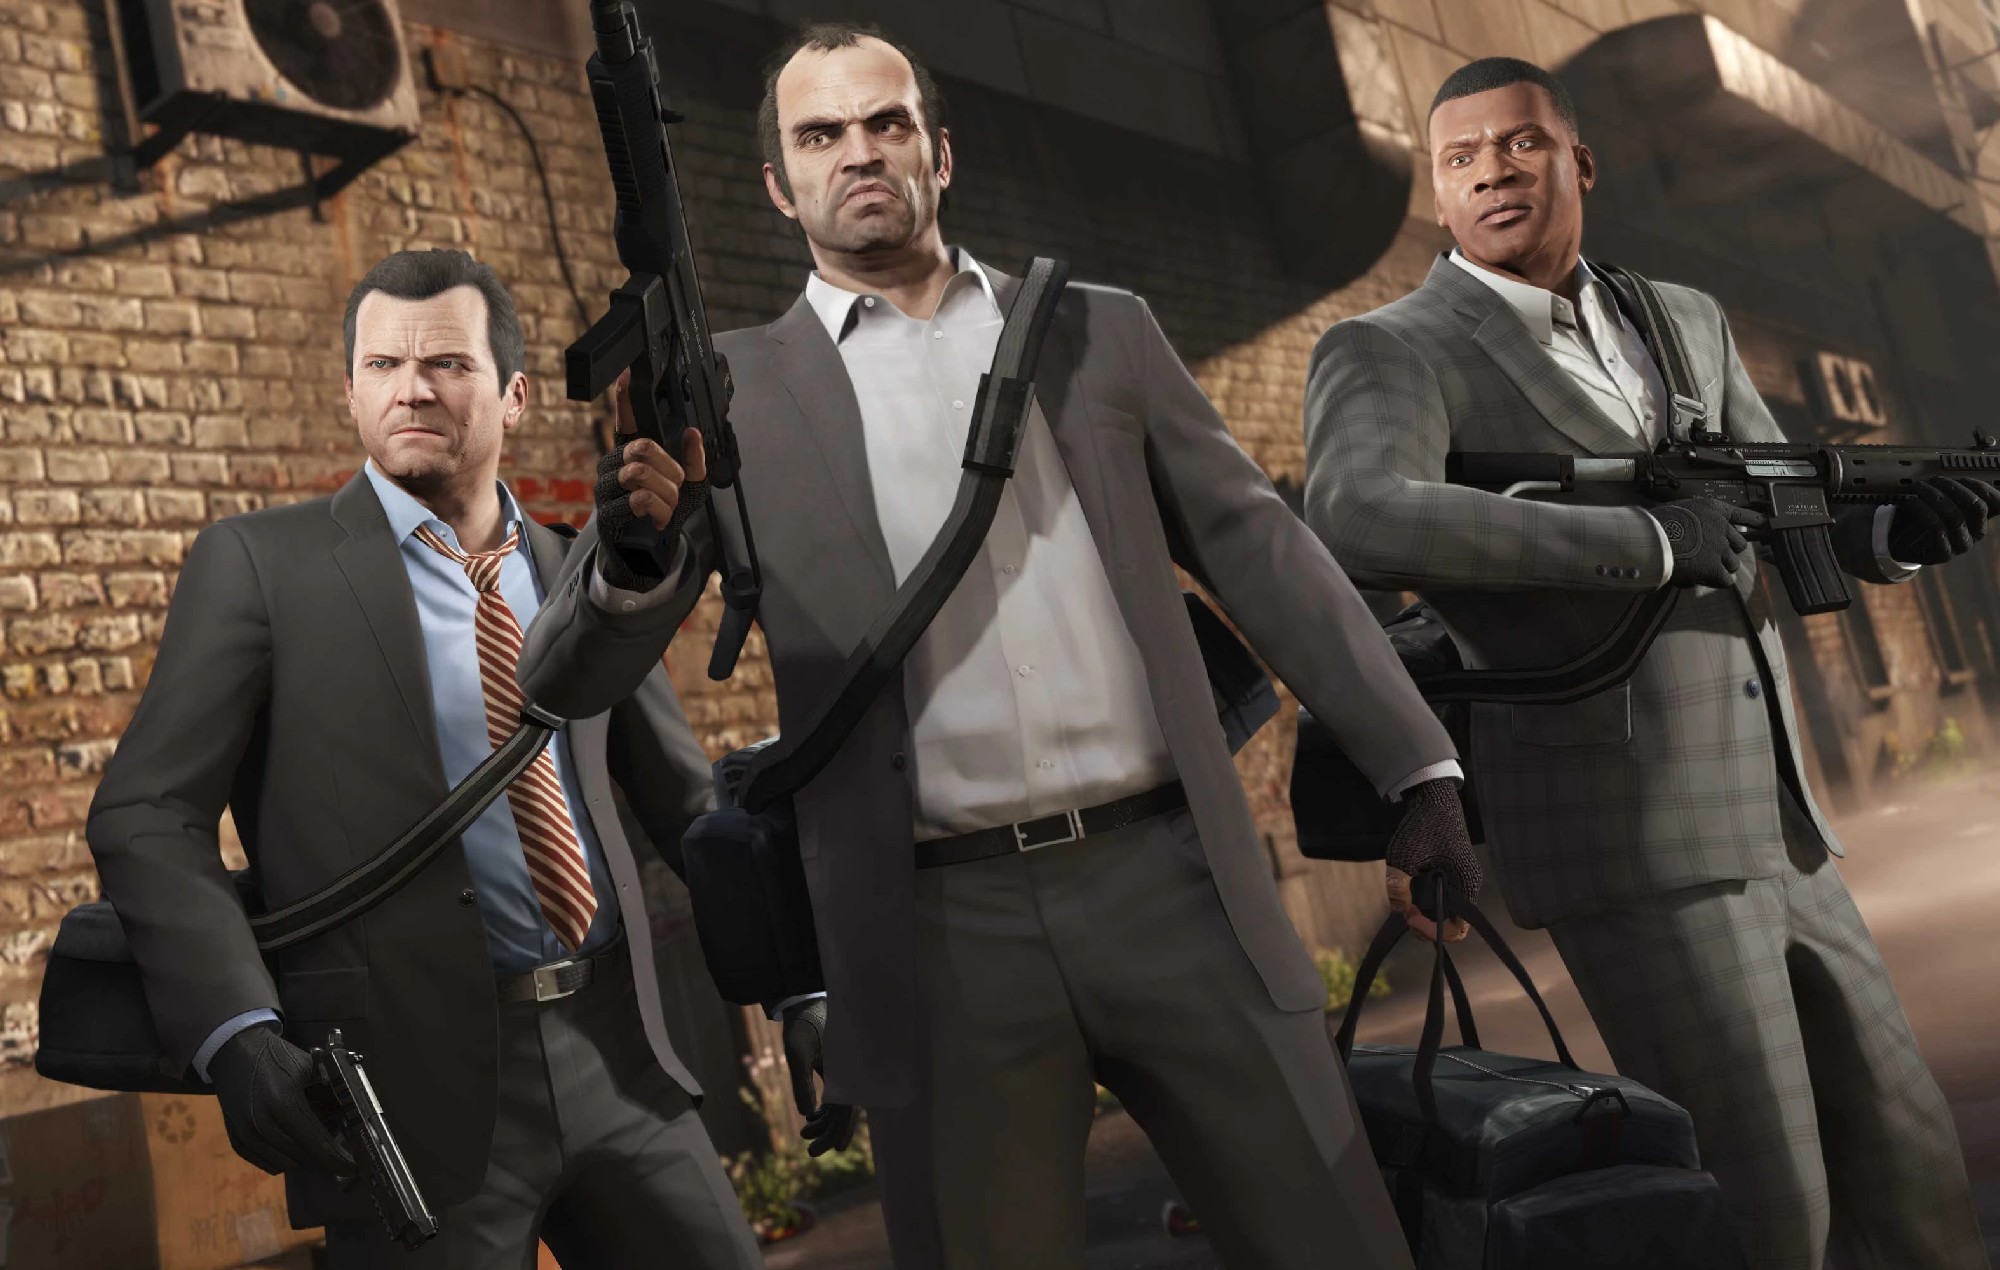 ‘Grand Theft Auto 6’ may use patented “highly dynamic and realistic animations”